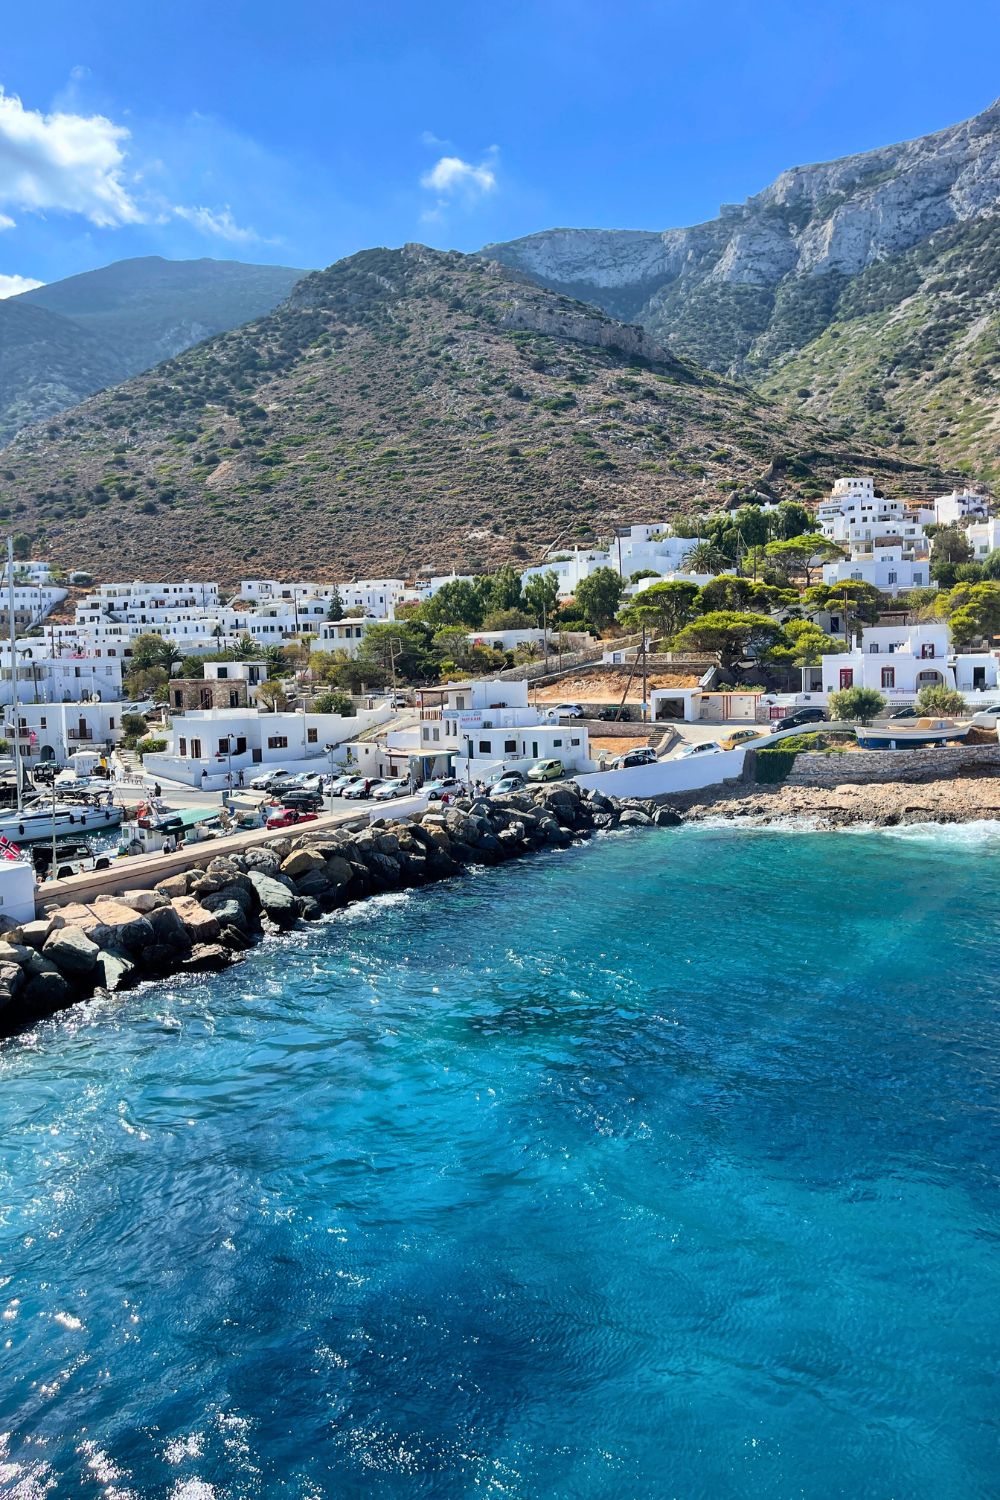 The picturesque harbor of Sifnos, featuring whitewashed buildings against a backdrop of rugged hills, with the crystal-clear waters of the Aegean Sea in the foreground.